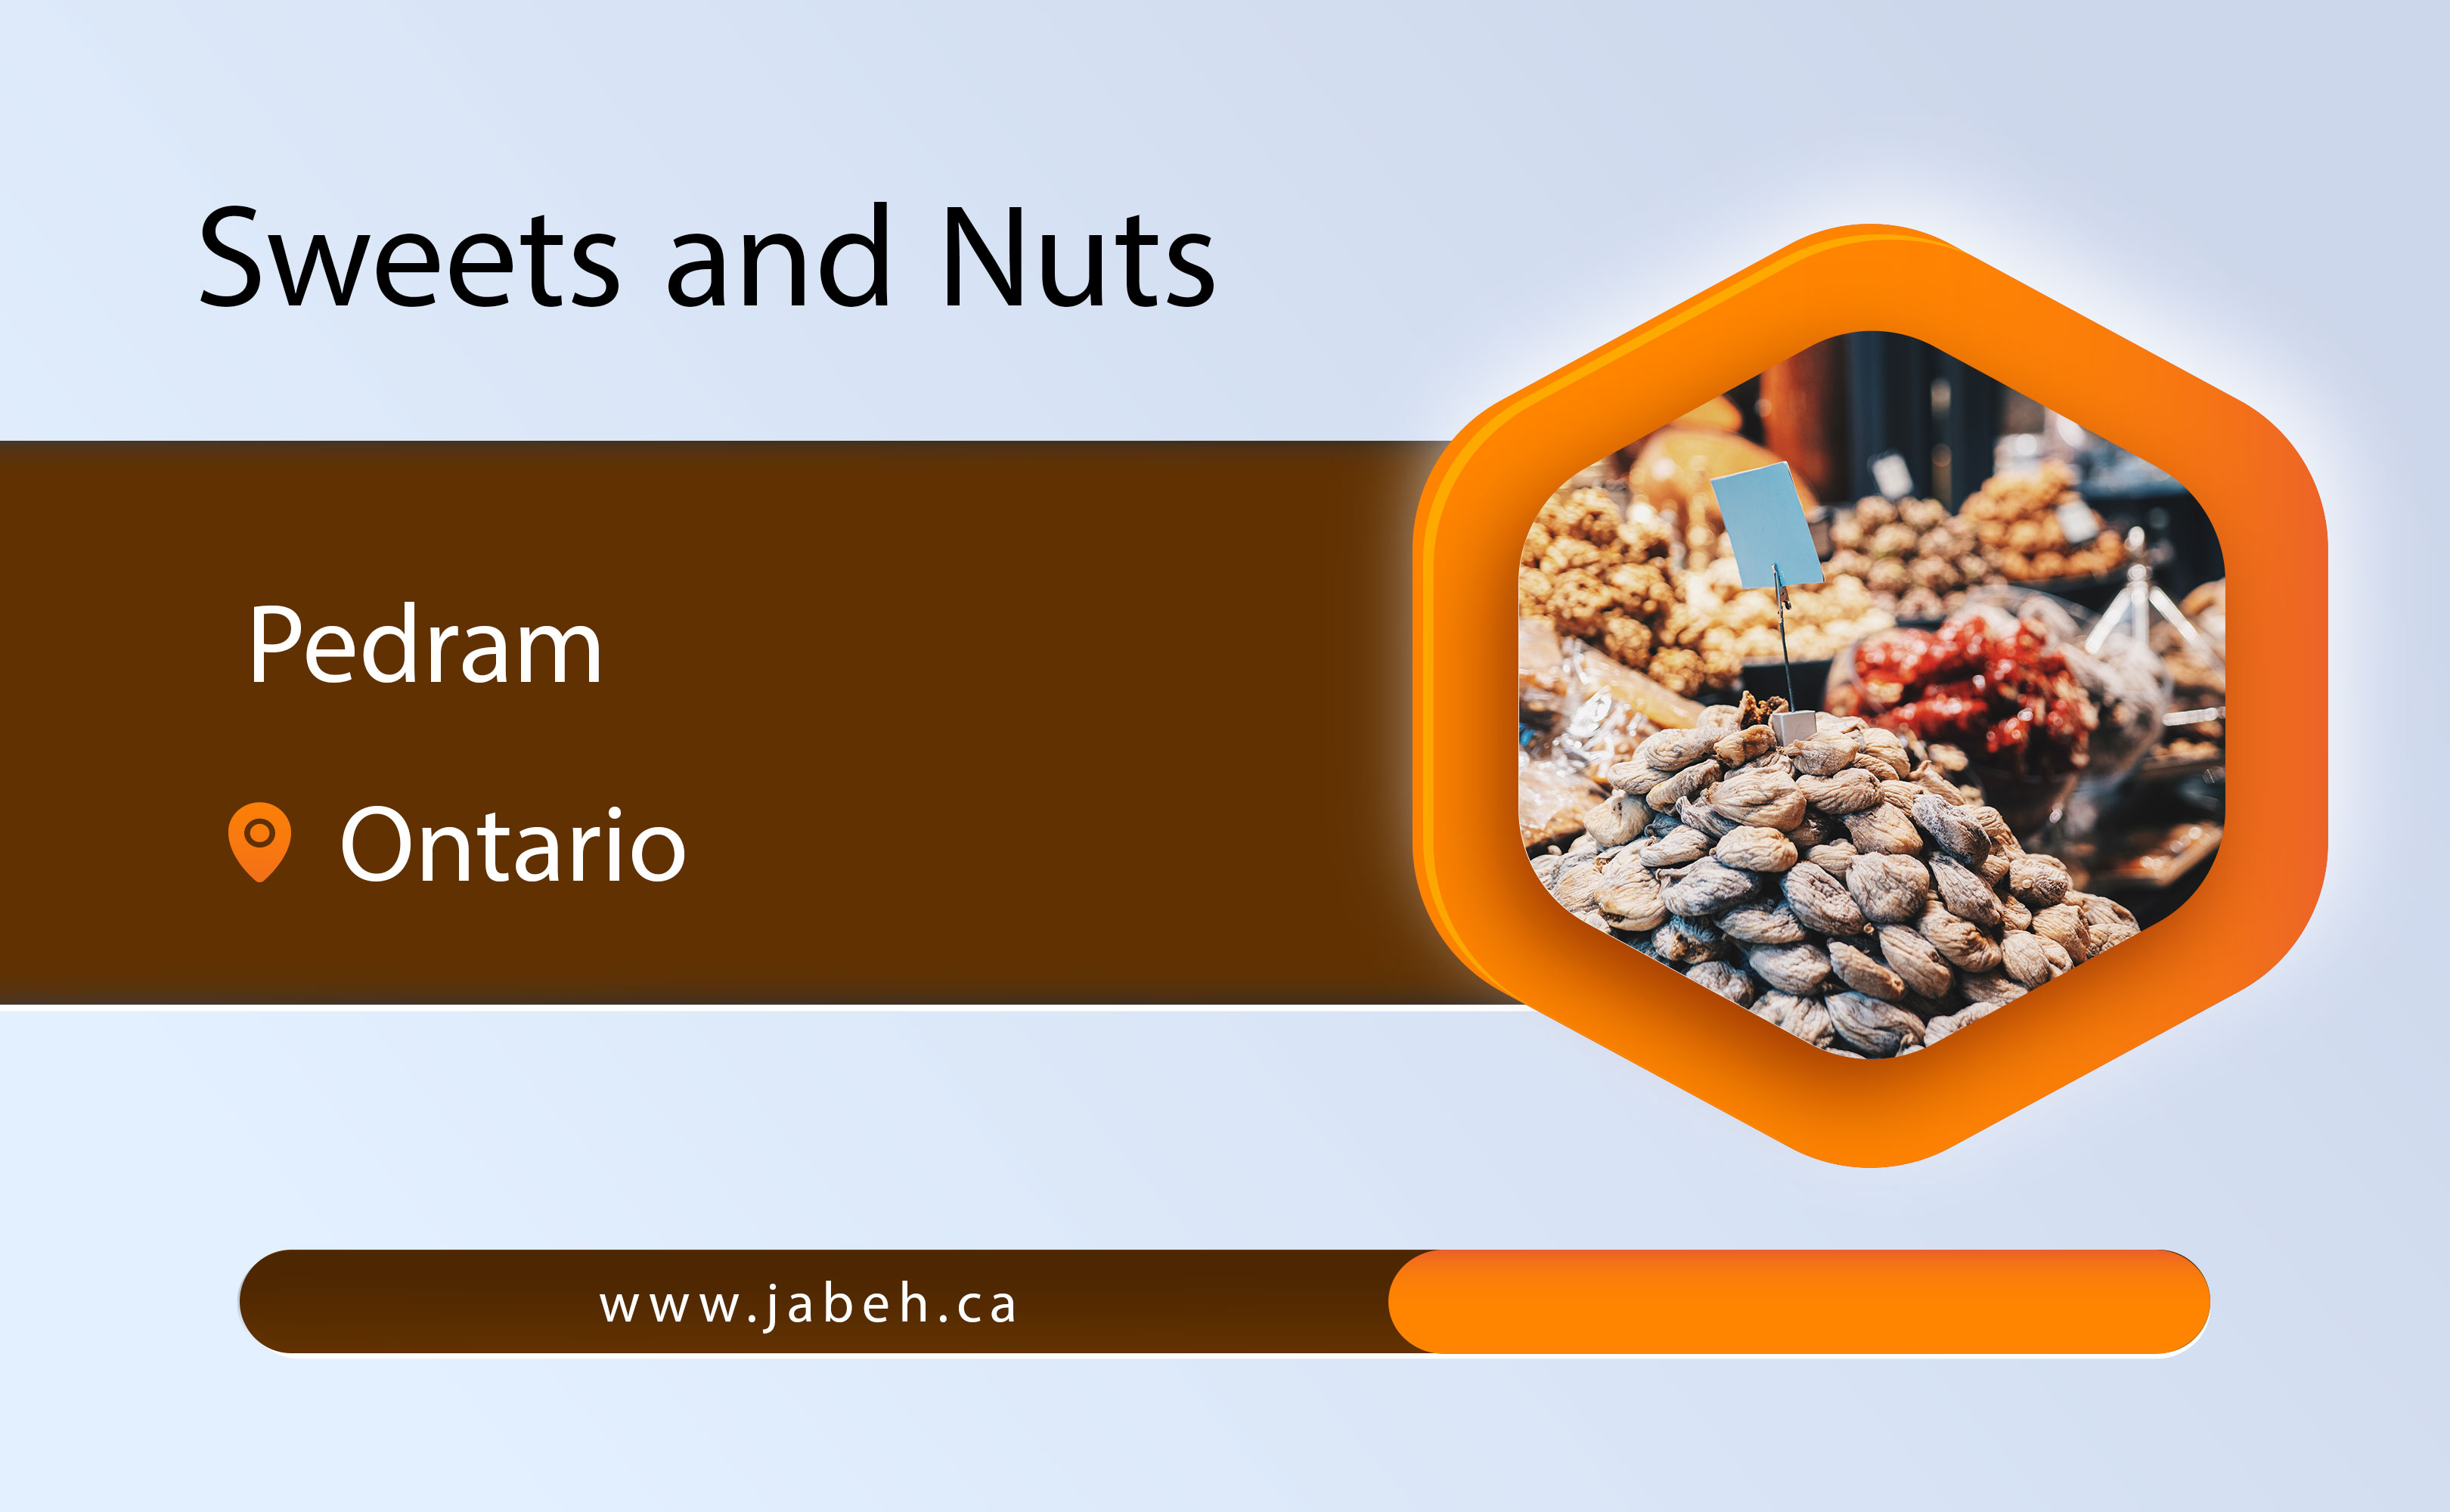 My grandfather's sweets and nuts in Ontario